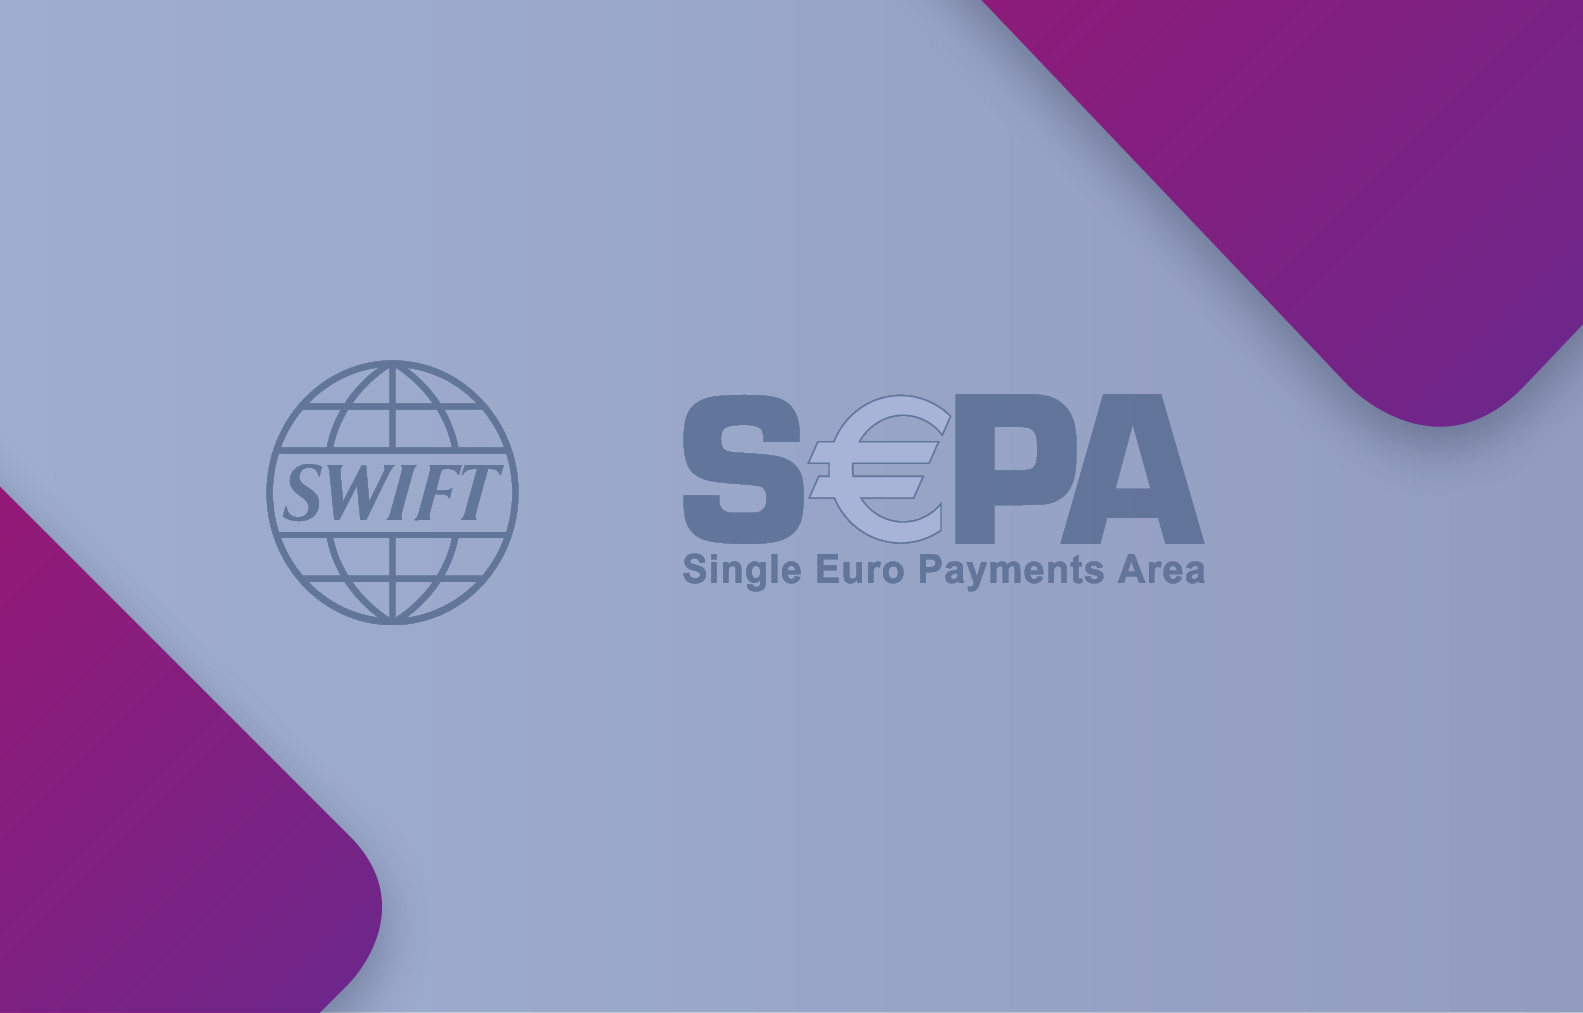 SWIFT & SEPA: what is the difference - Bilderlings Pay